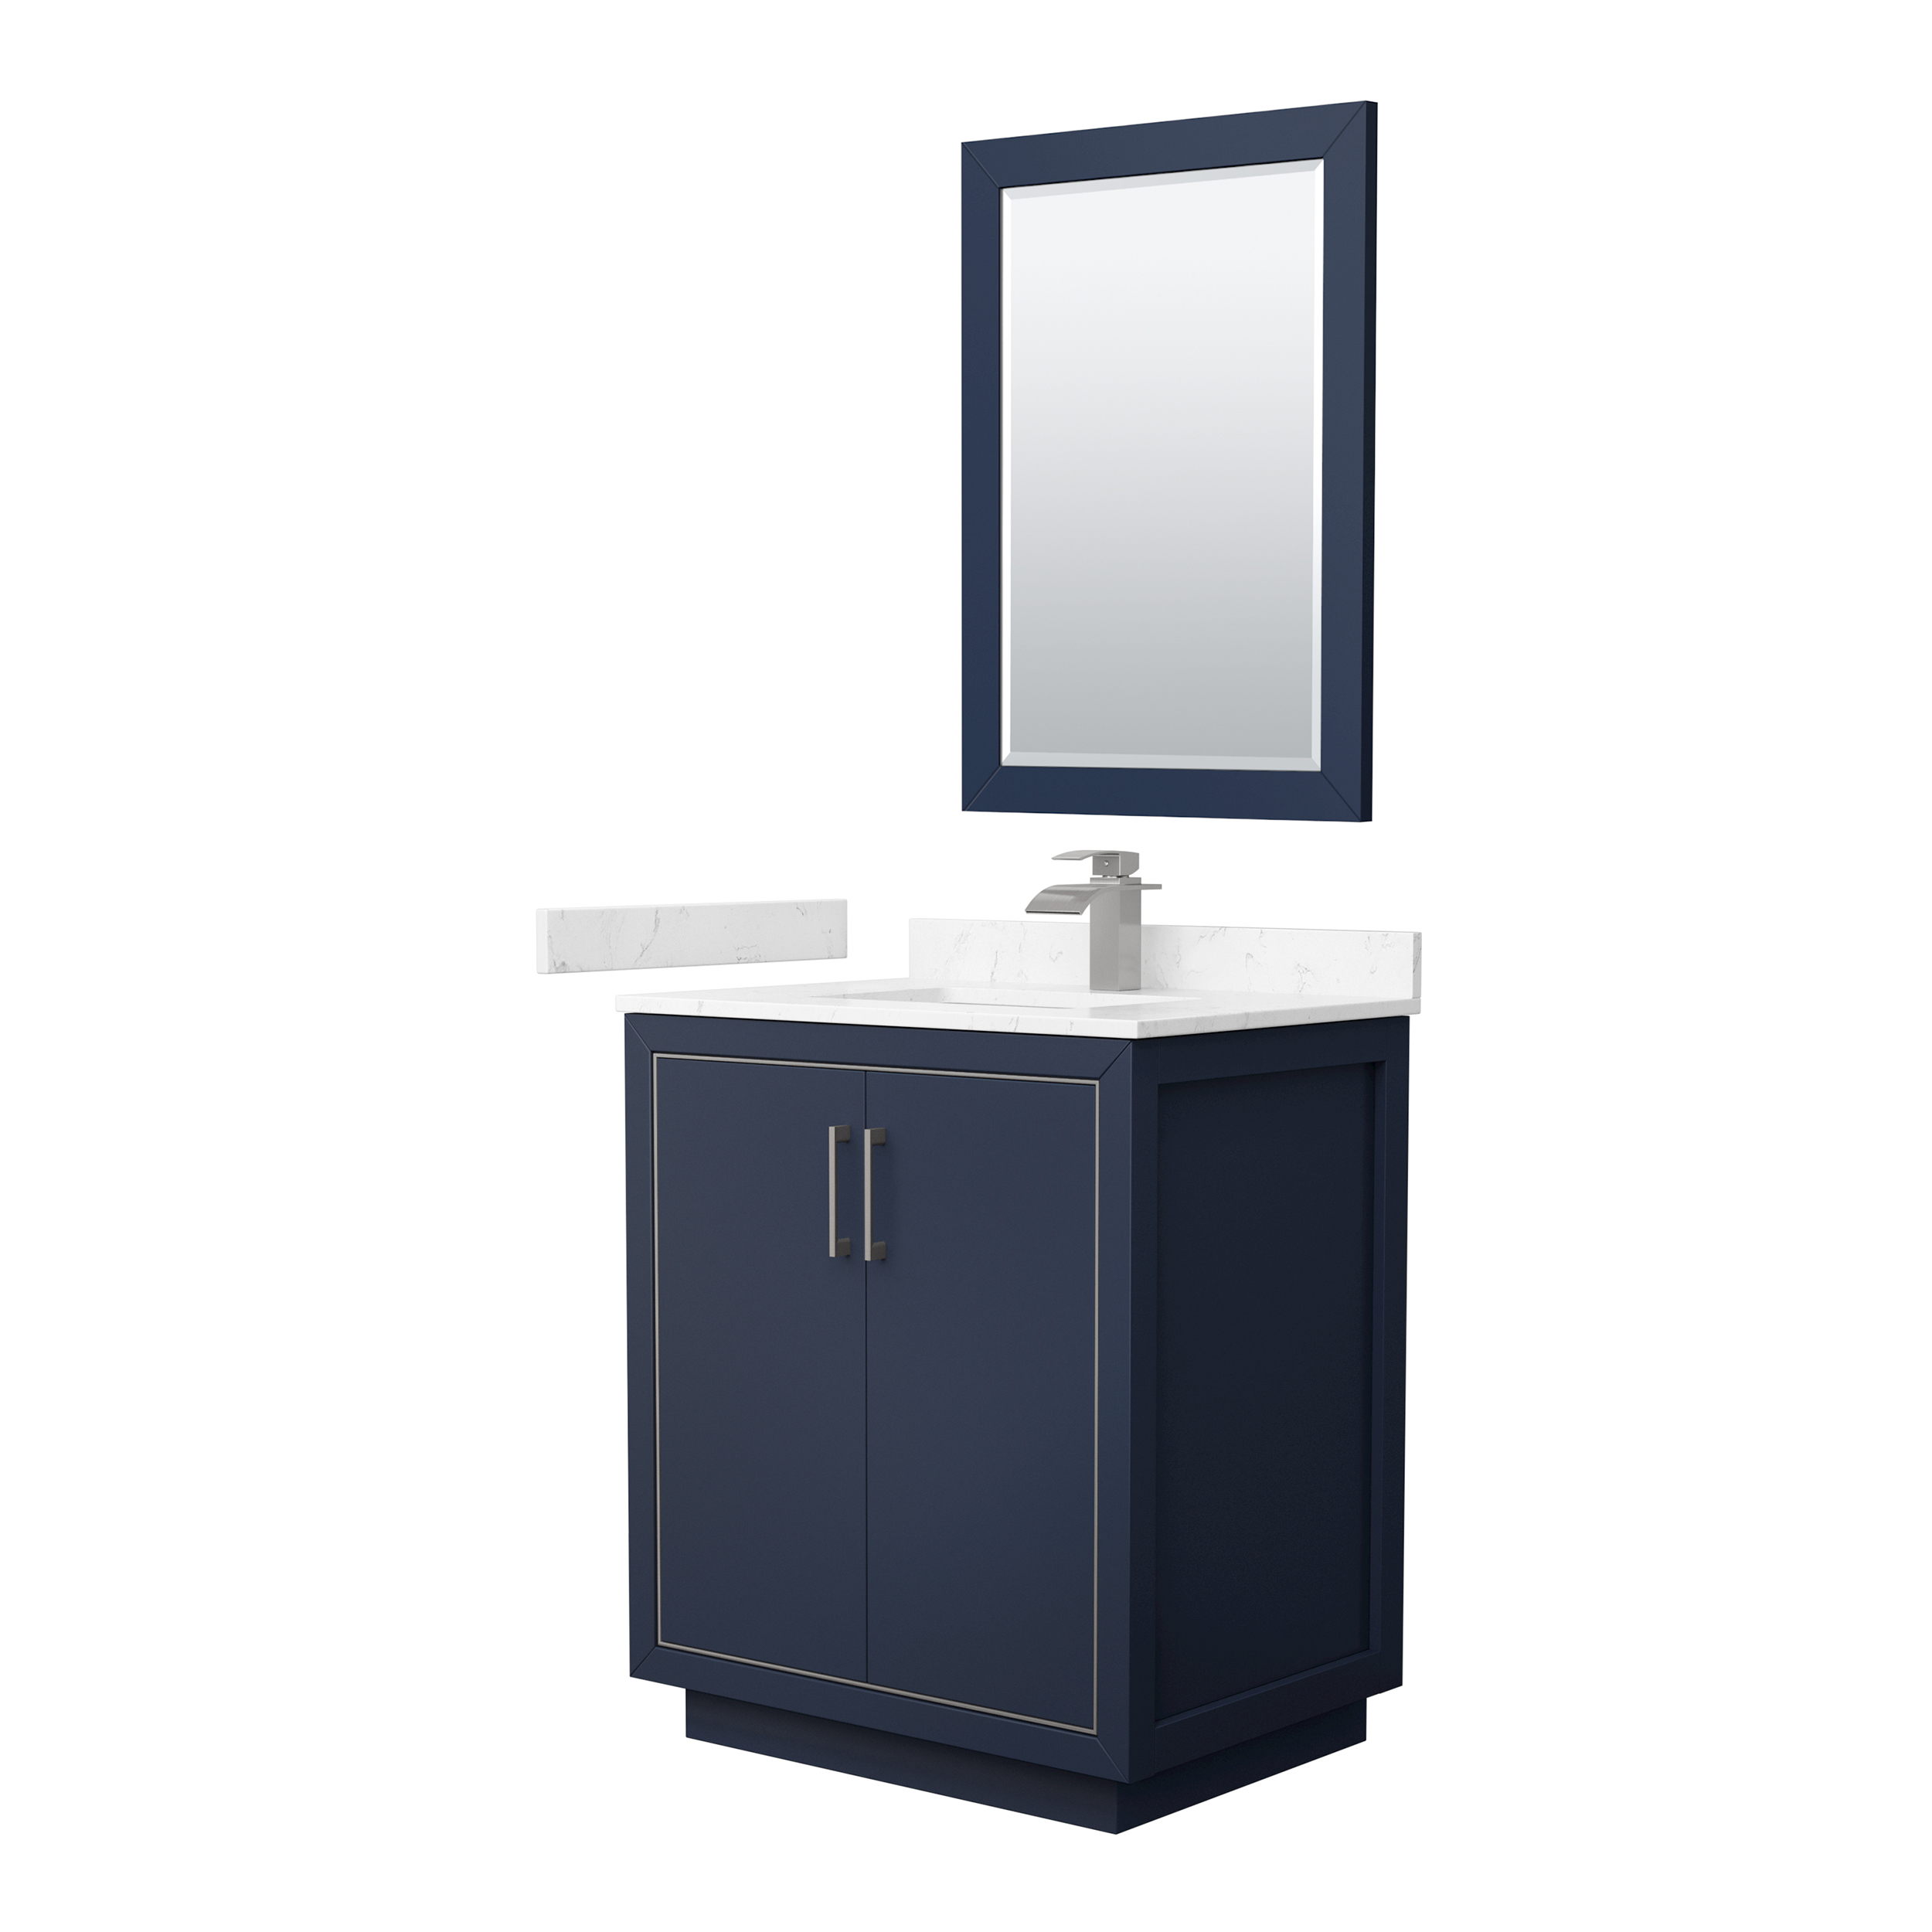 30" Single Bathroom Vanity with 4 Color Options, 3 Countertop Options, 3 Hardware Options and Mirror Option